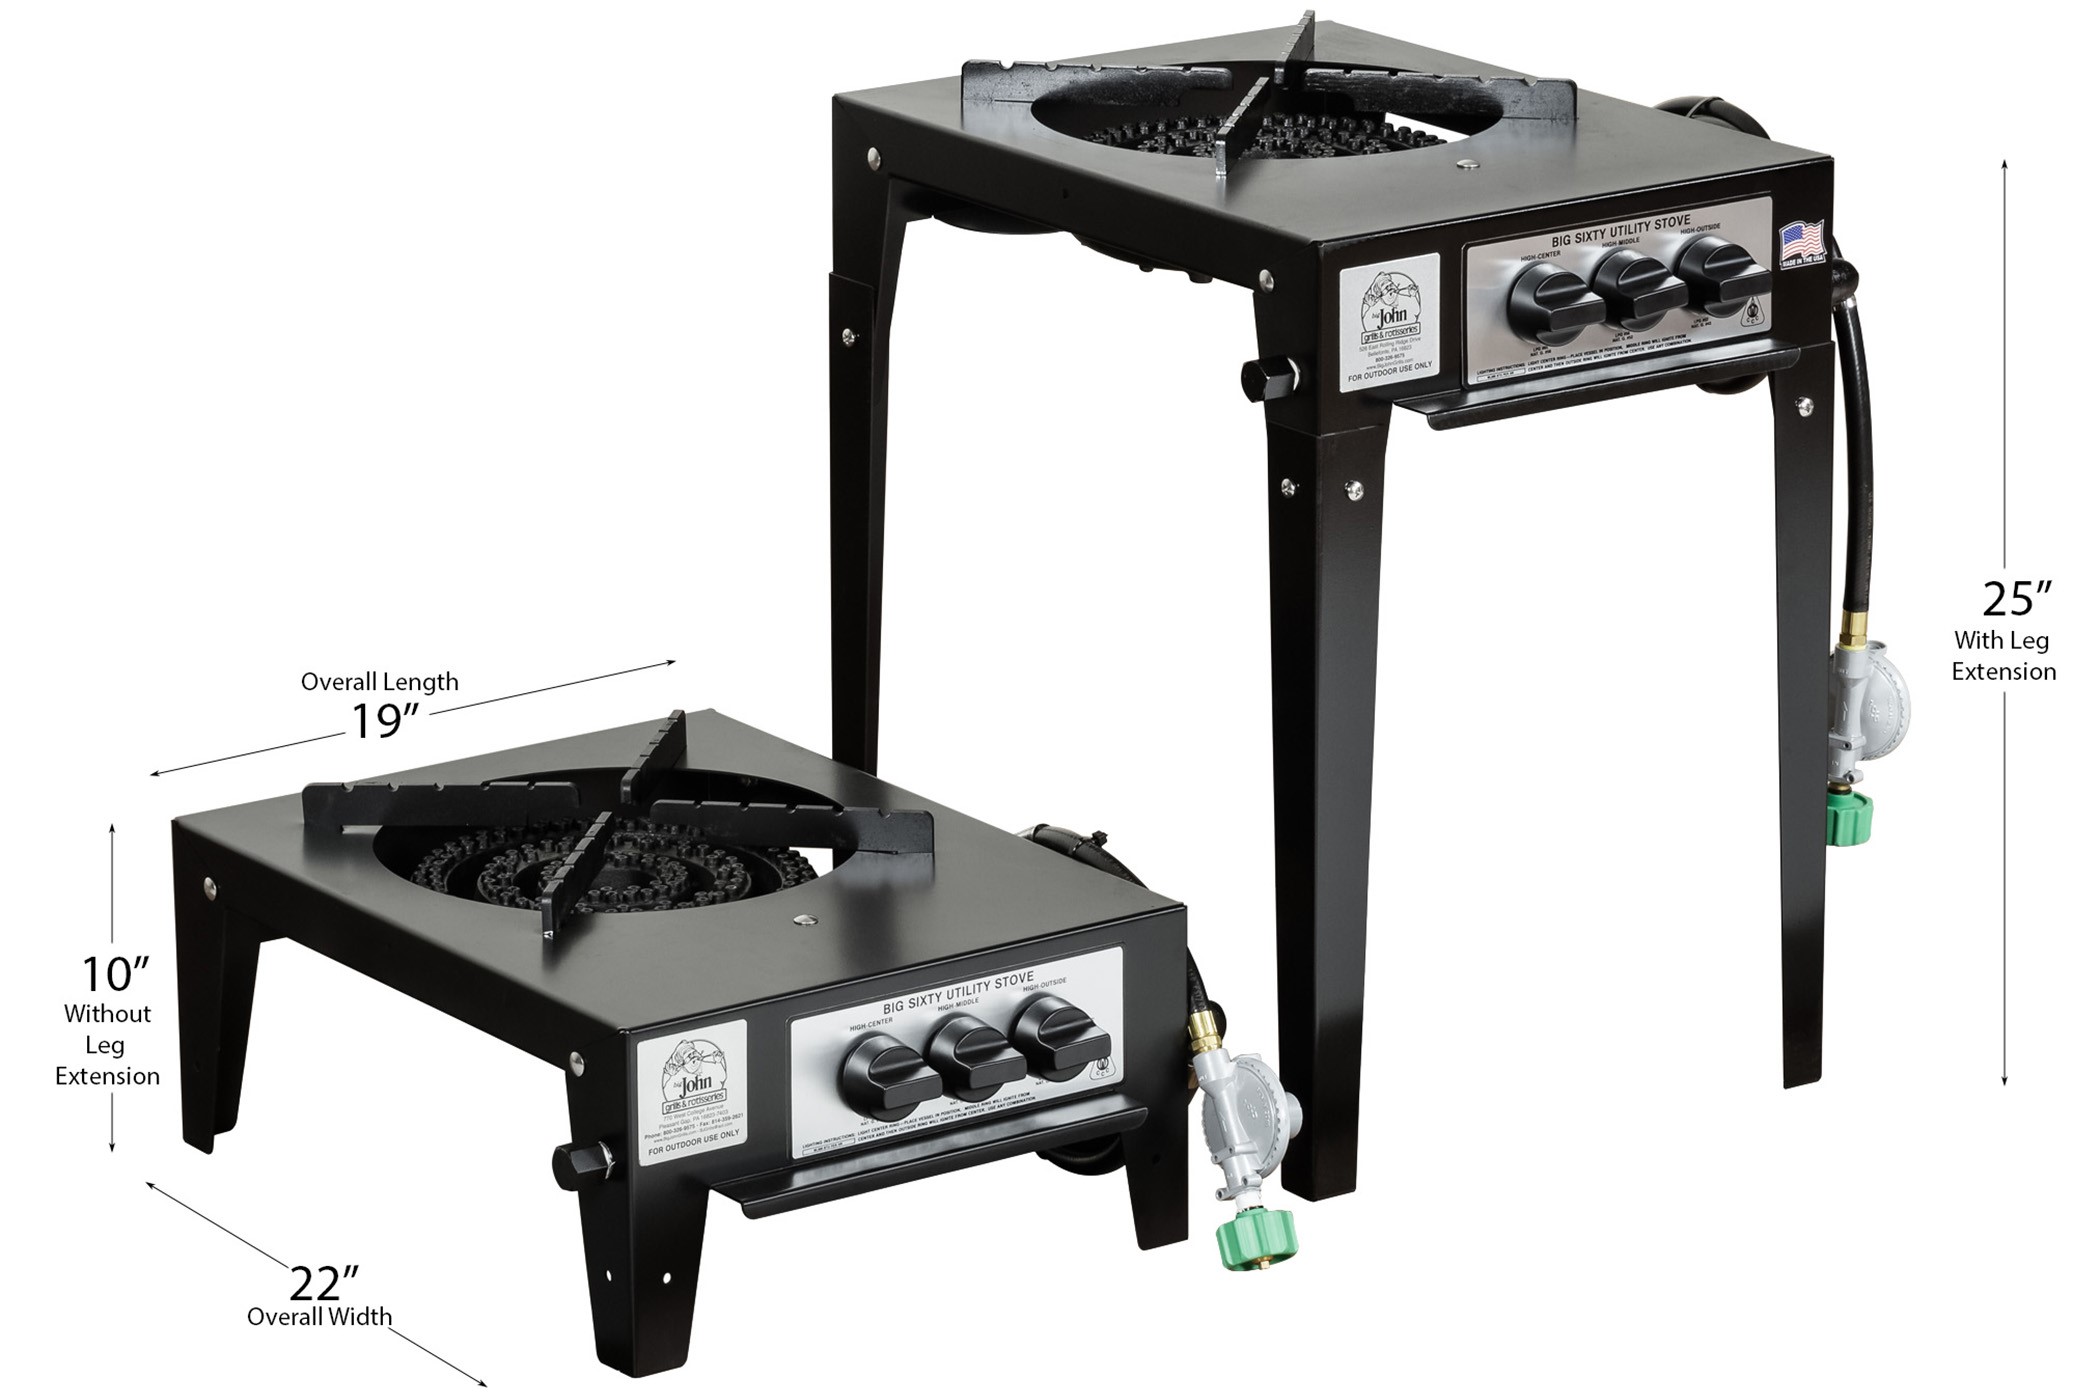 https://www.bigjohngrills.com/image?filename=SPECIFICATIONS%20PICTURES/Specs%20Big%2060%20I.jpg&width=0&height=0